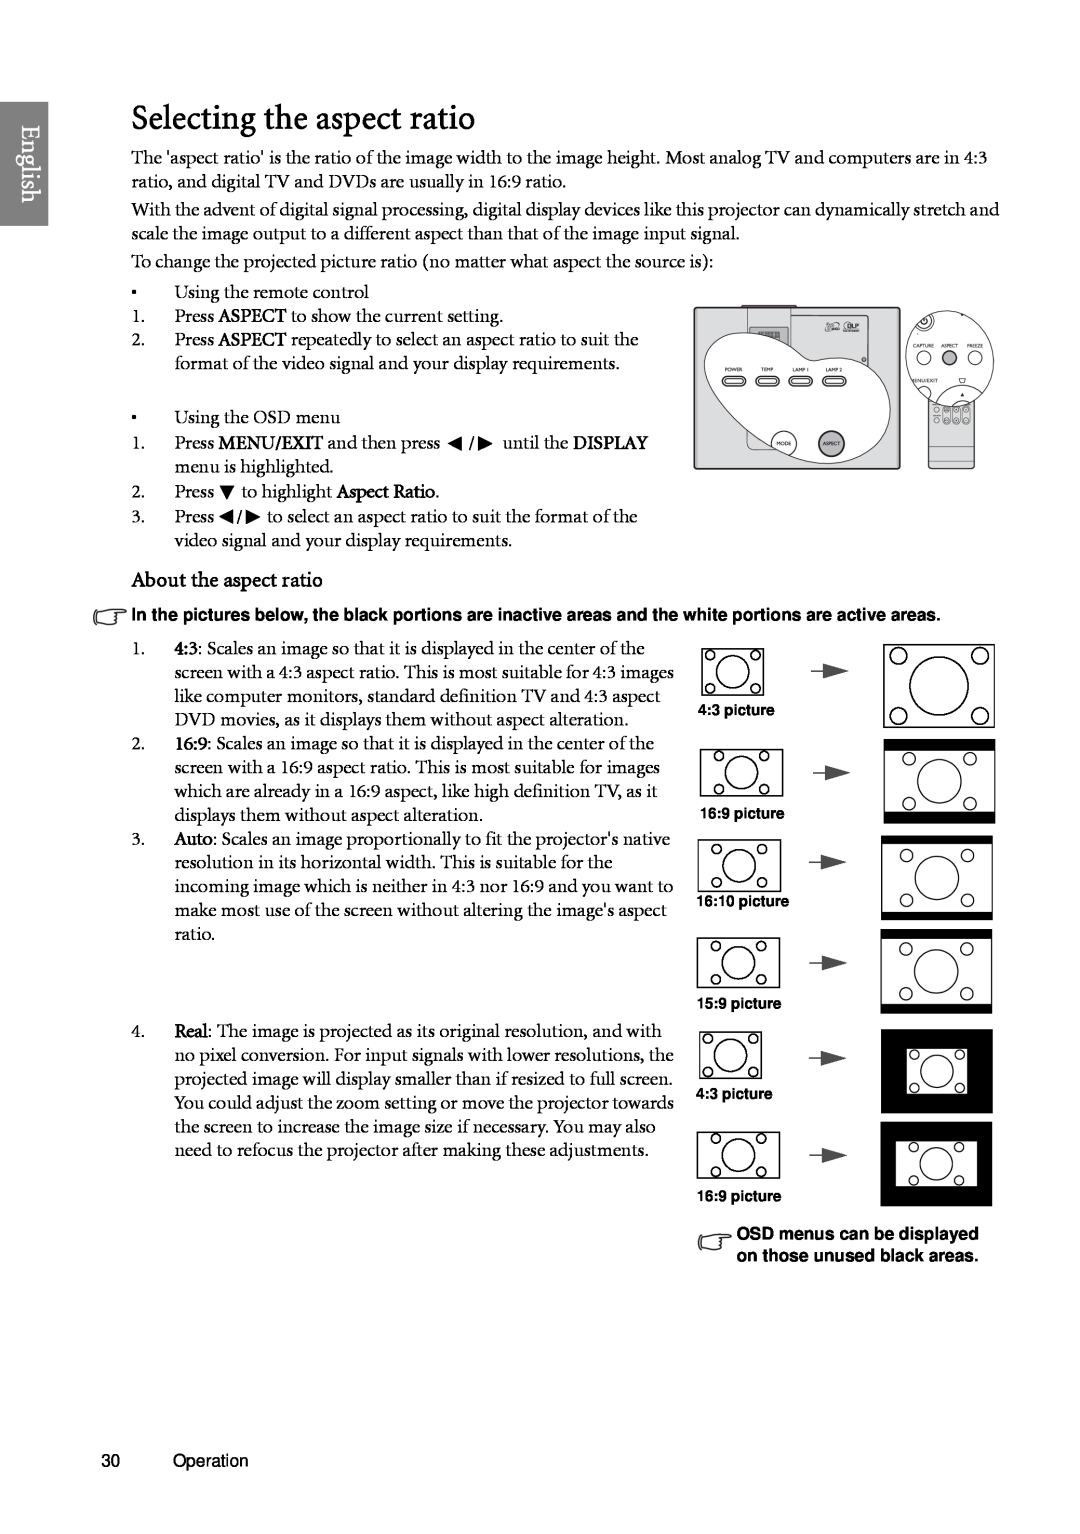 BenQ SP920 user manual Selecting the aspect ratio, English, About the aspect ratio 